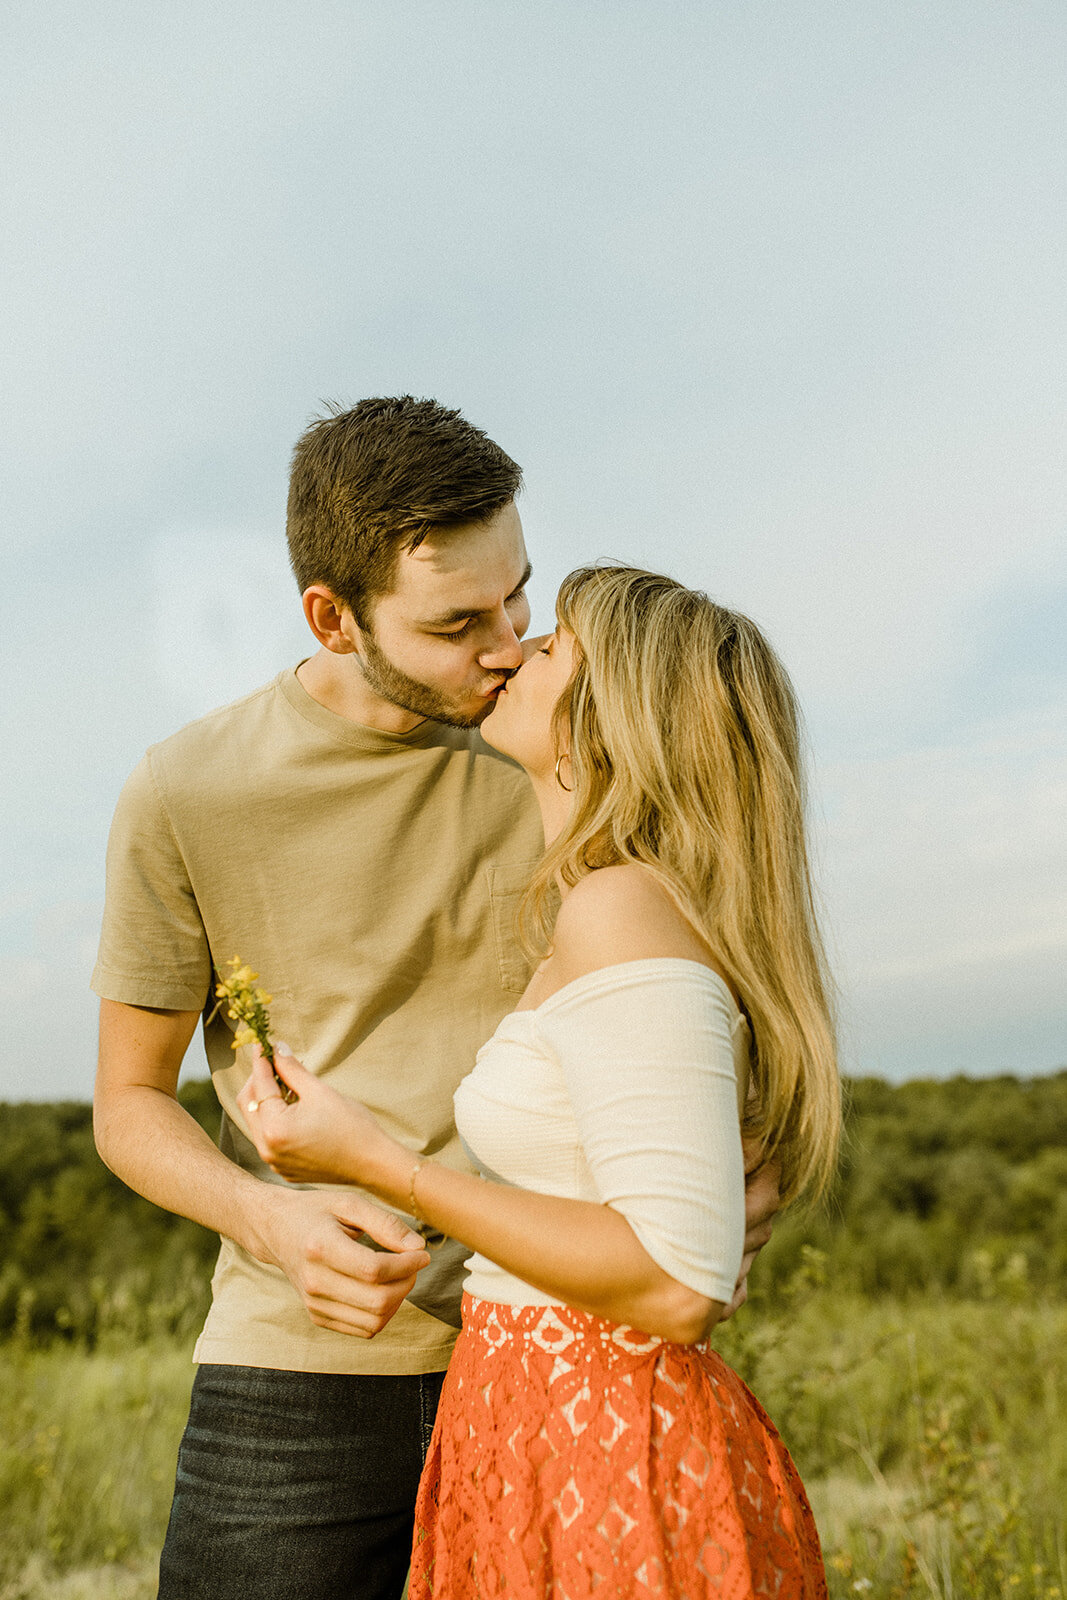 country-cut-flowers-summer-engagement-session-fun-romantic-indie-movie-wanderlust-317